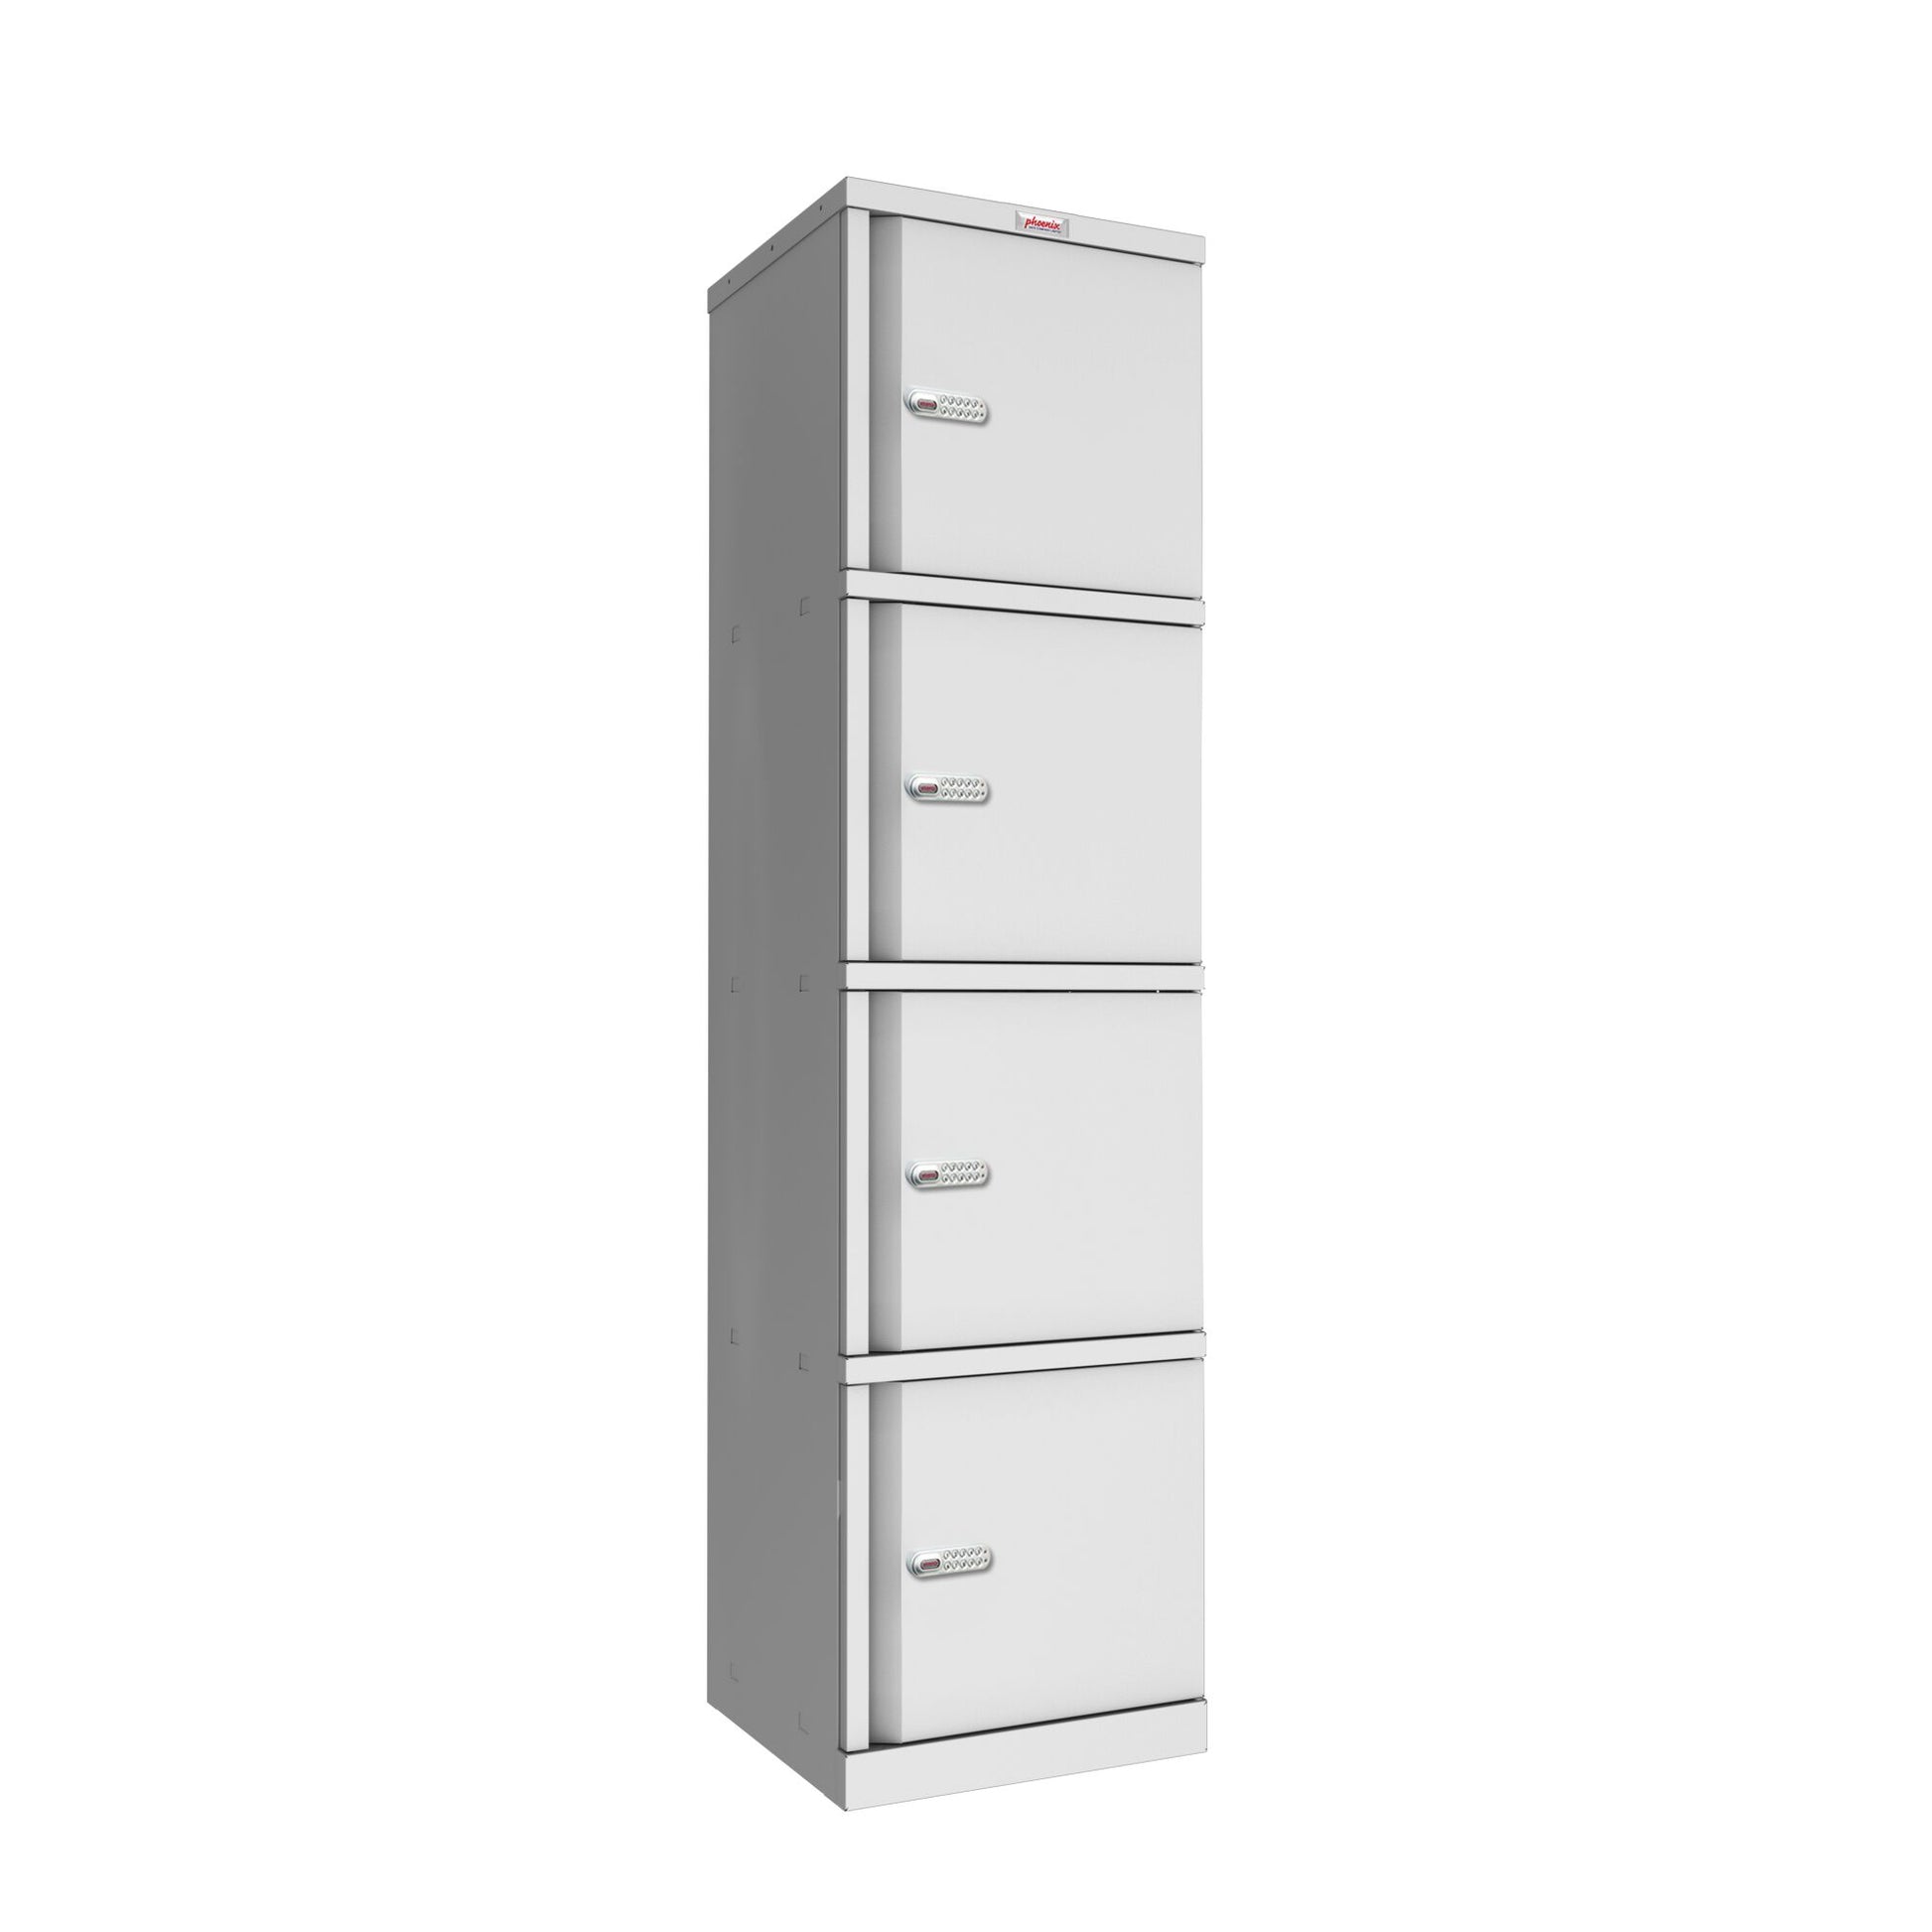 Steel 4 tier locker unit or 4 door storage unit - price includes delivery and build on site